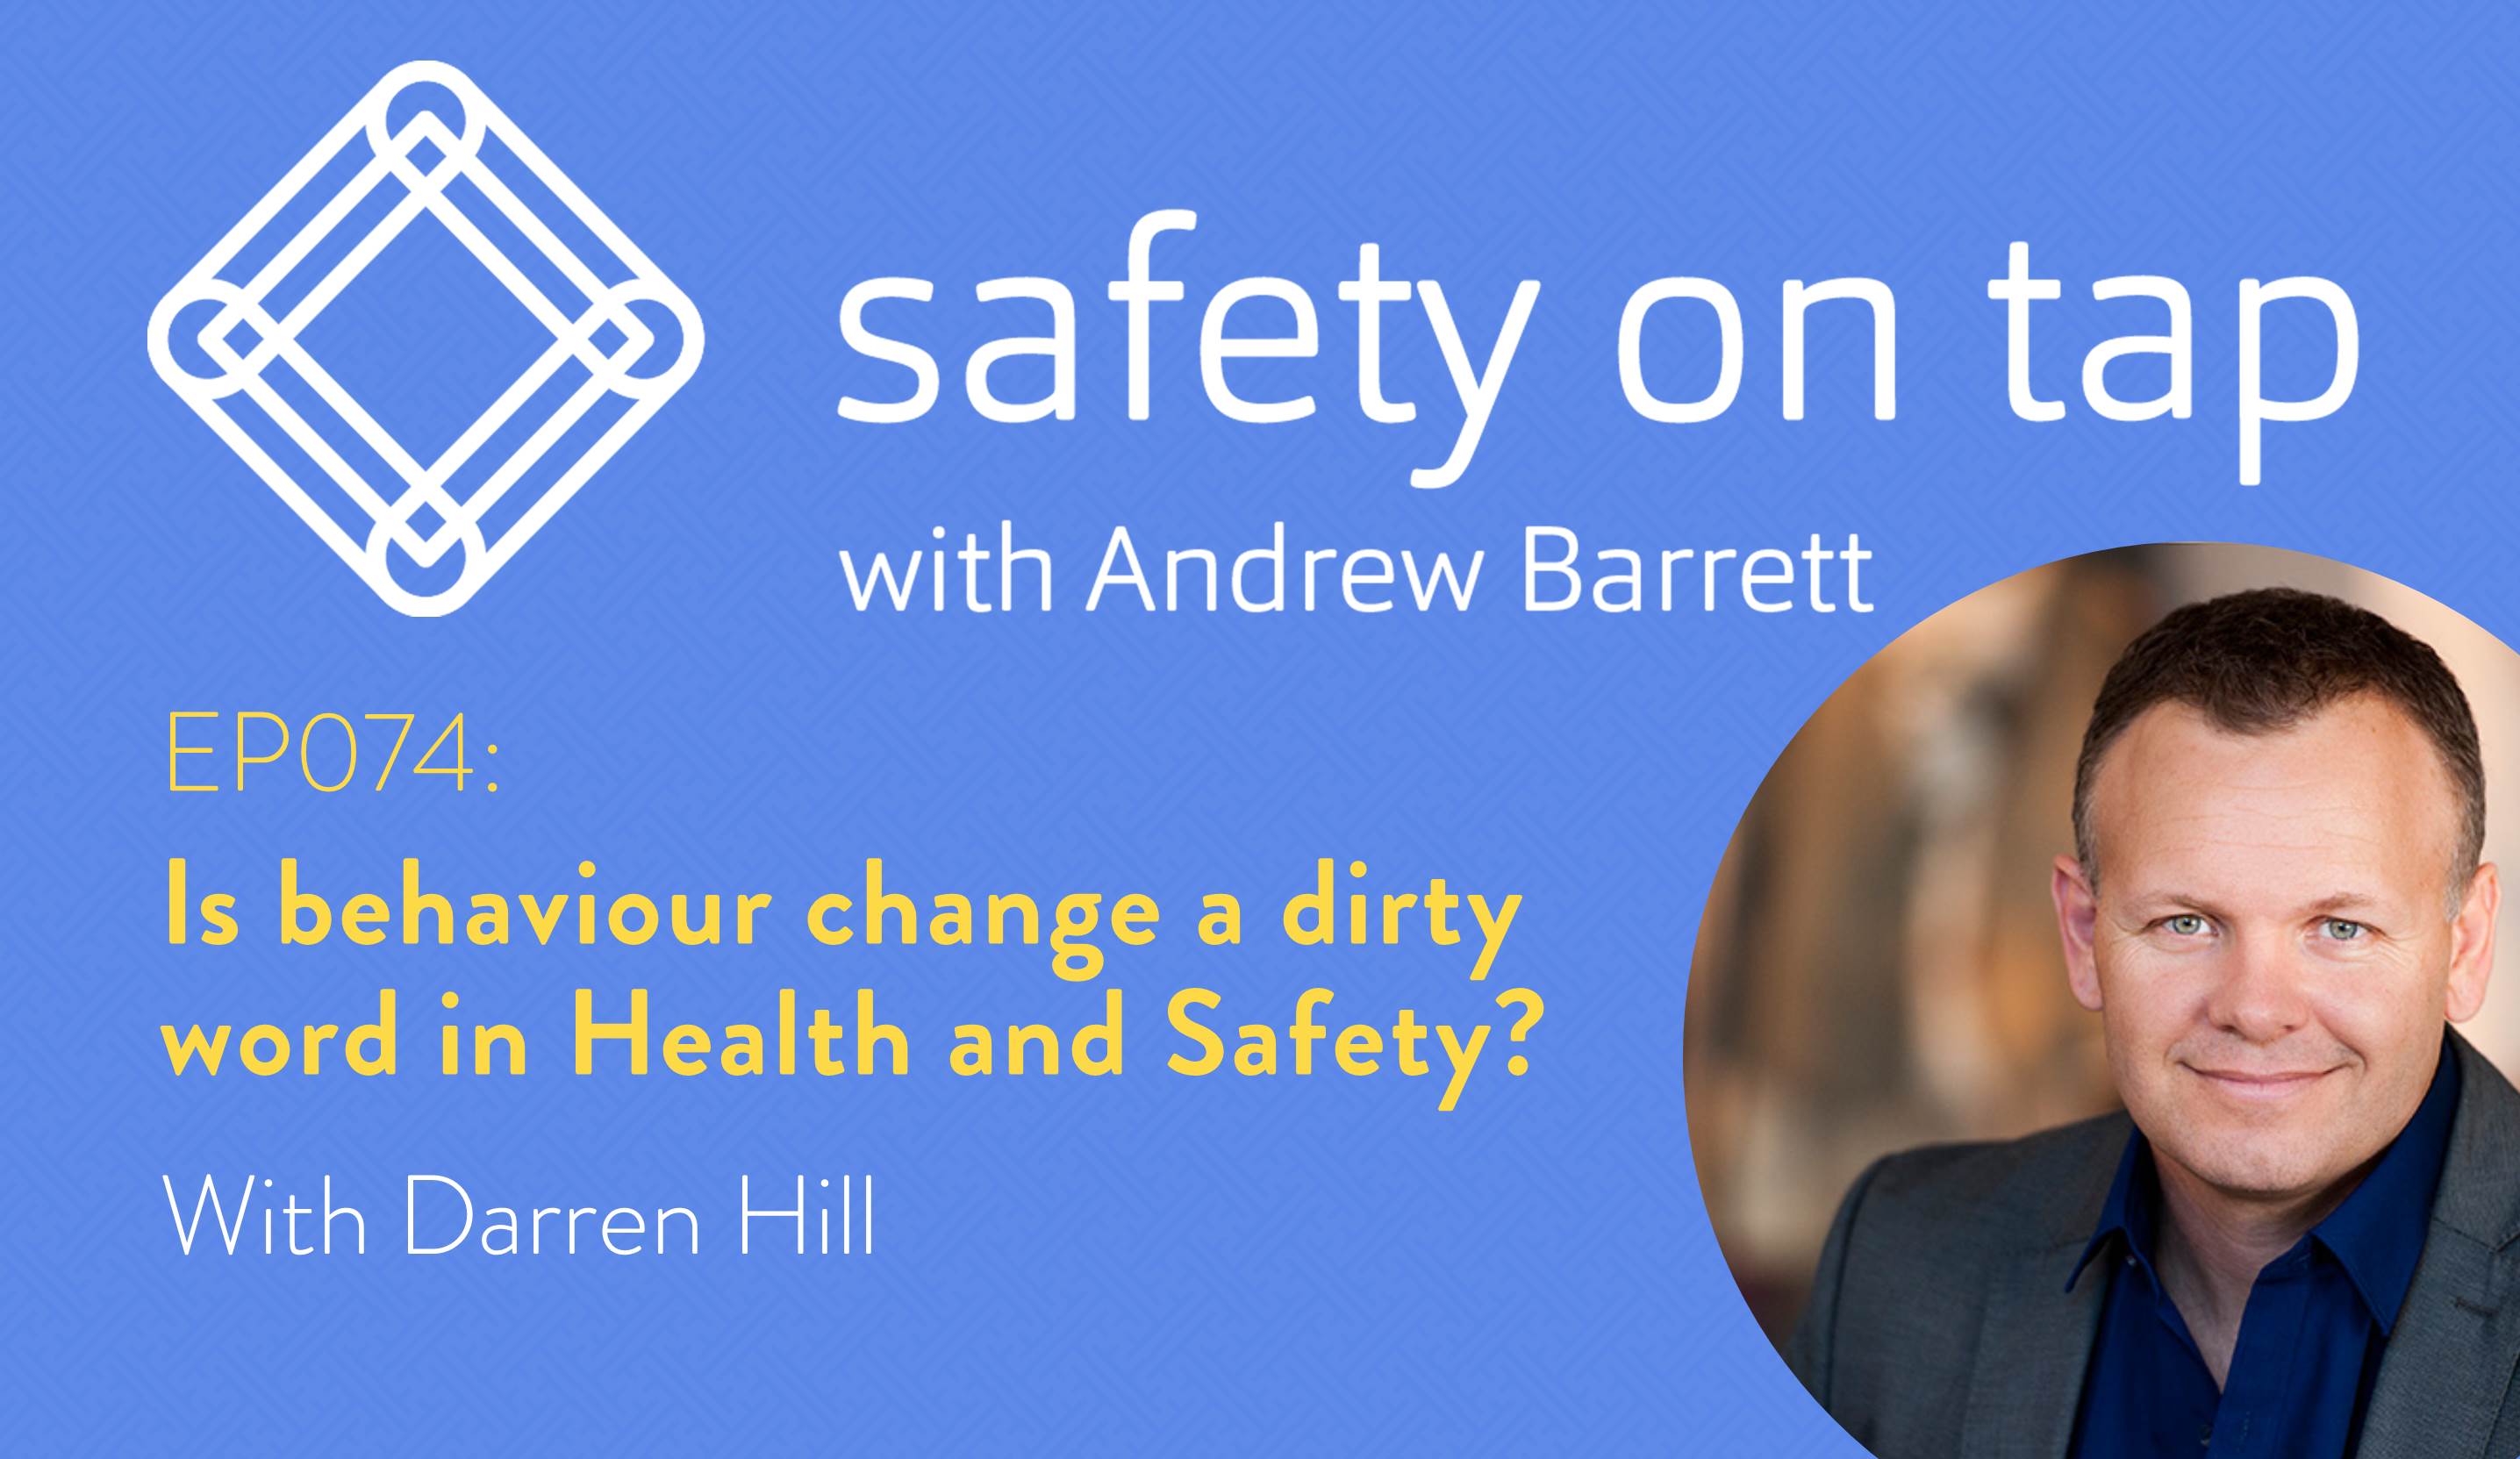 Ep074: Is behaviour change a dirty word in health and safety? With Darren Hill